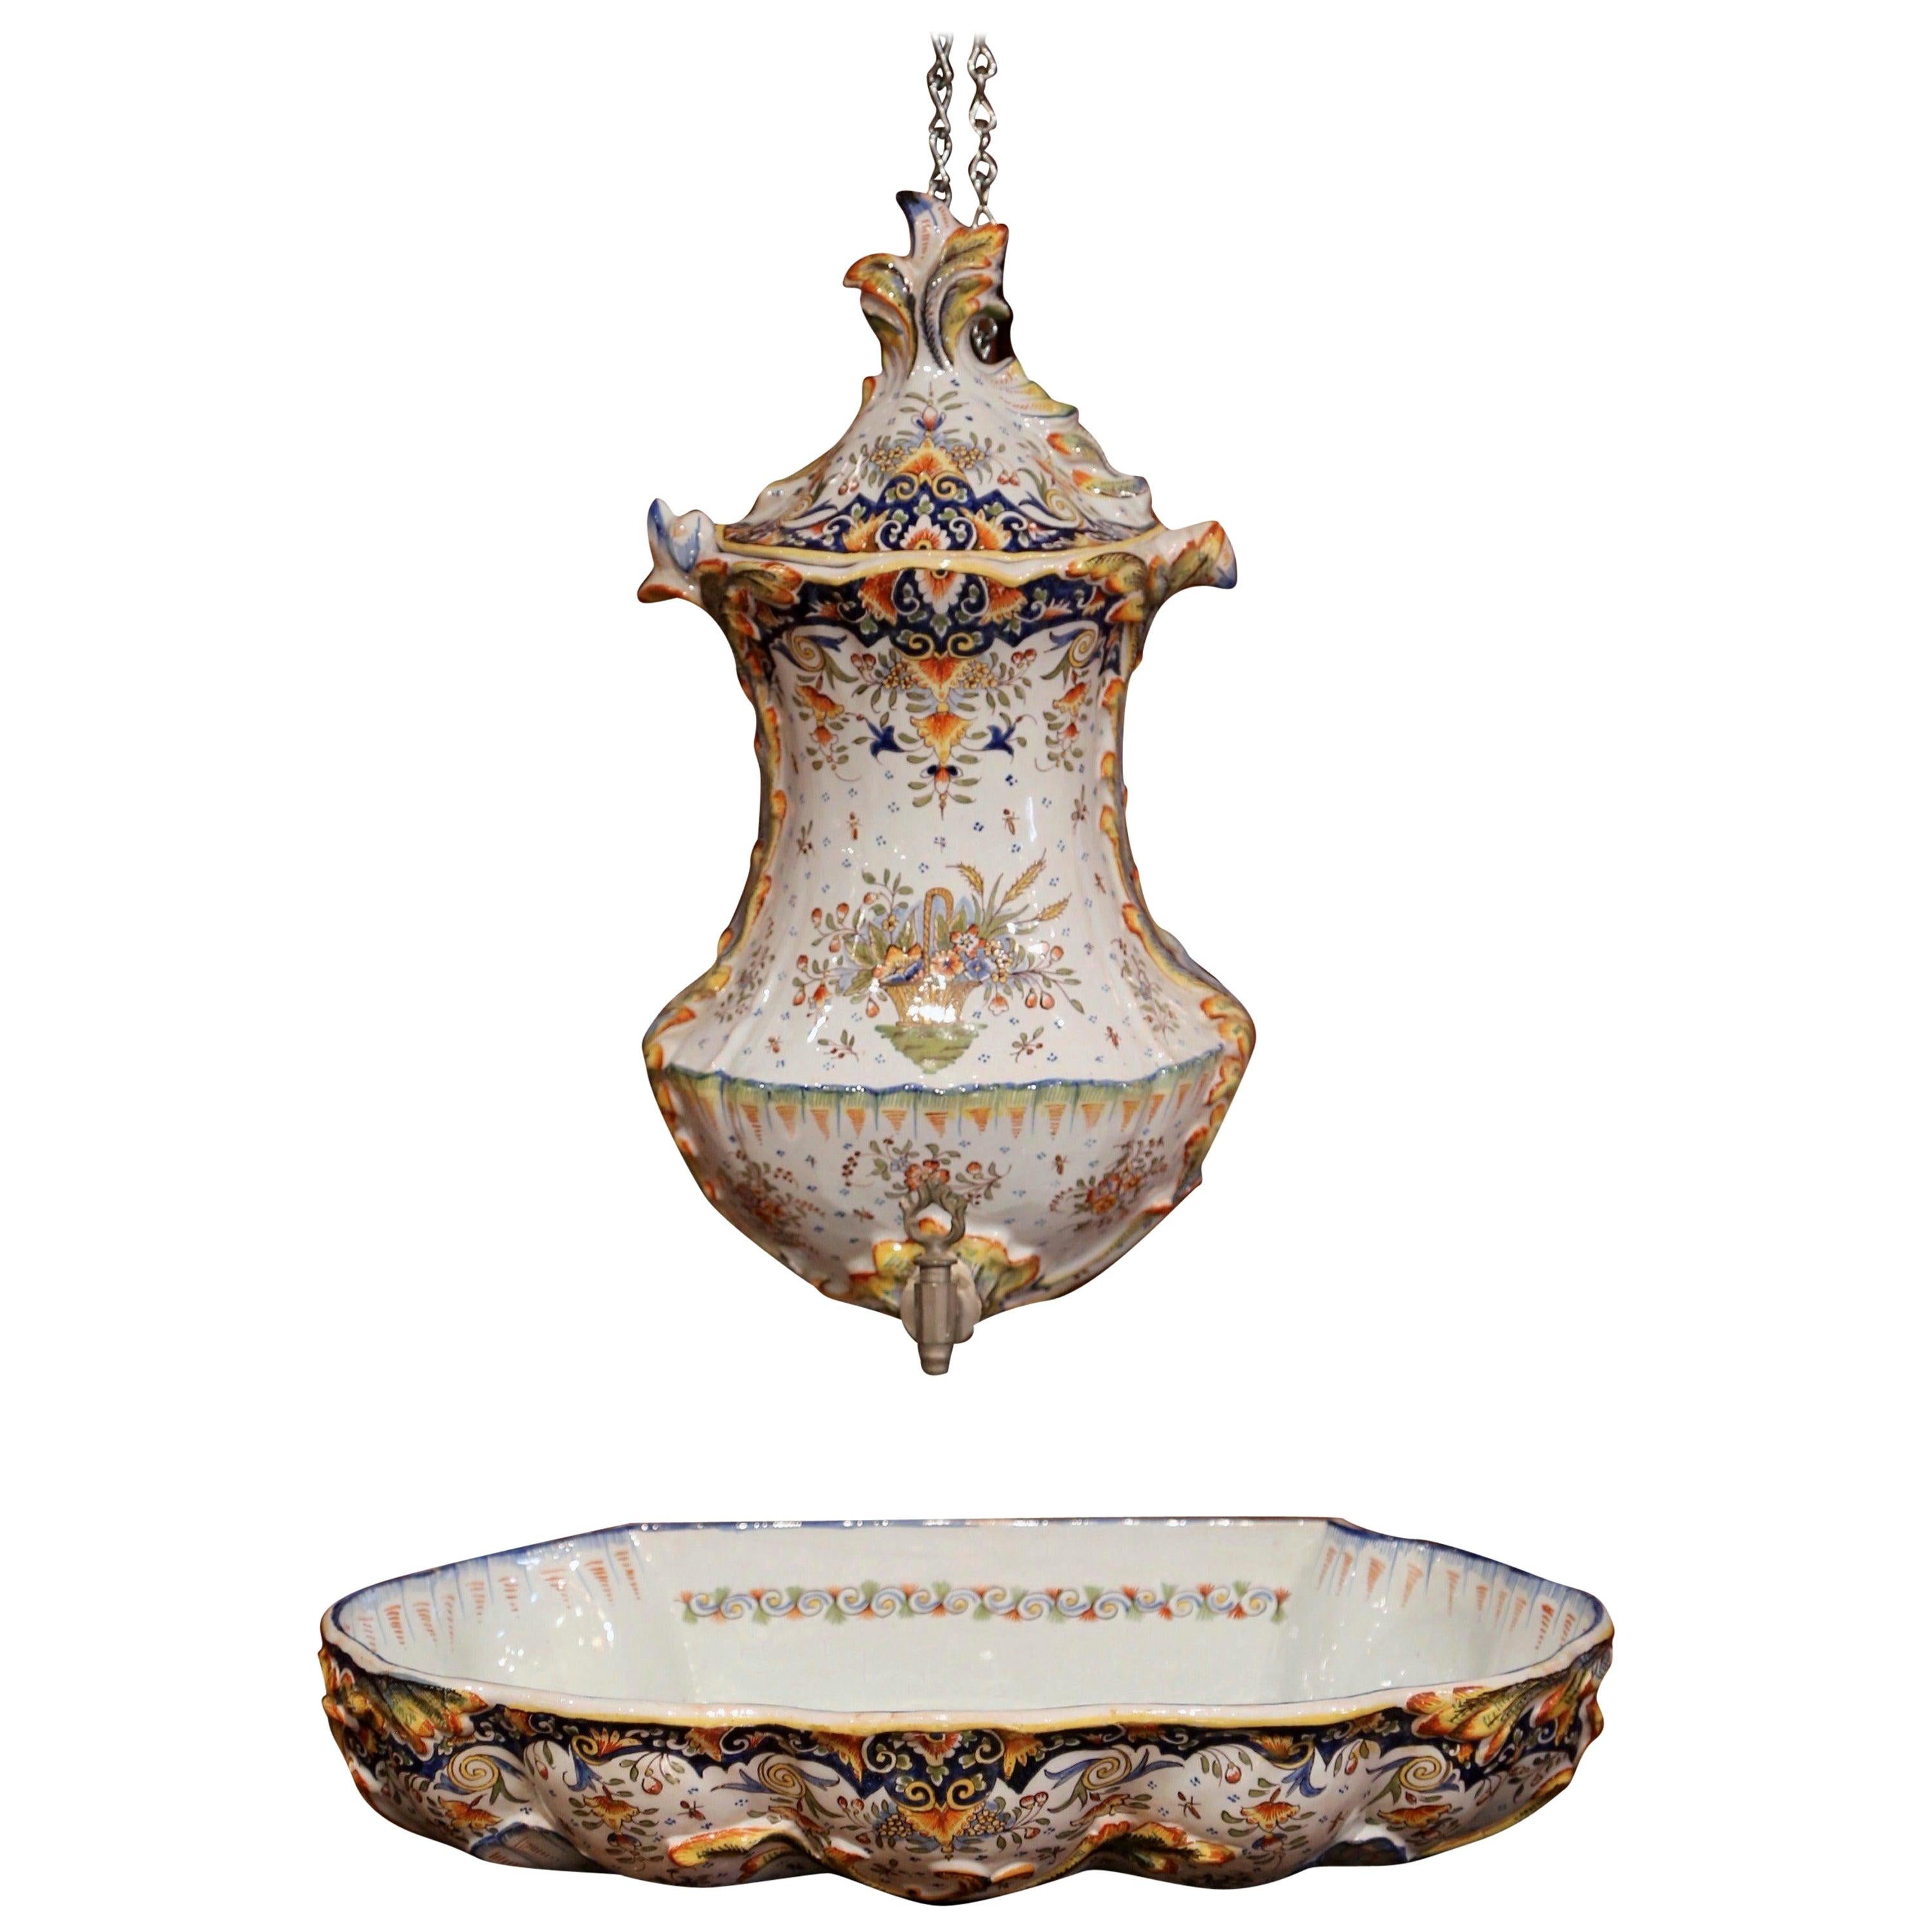 Early 20th Century, French Hand Painted Wall Faience Lavabo Fountain from Rouen